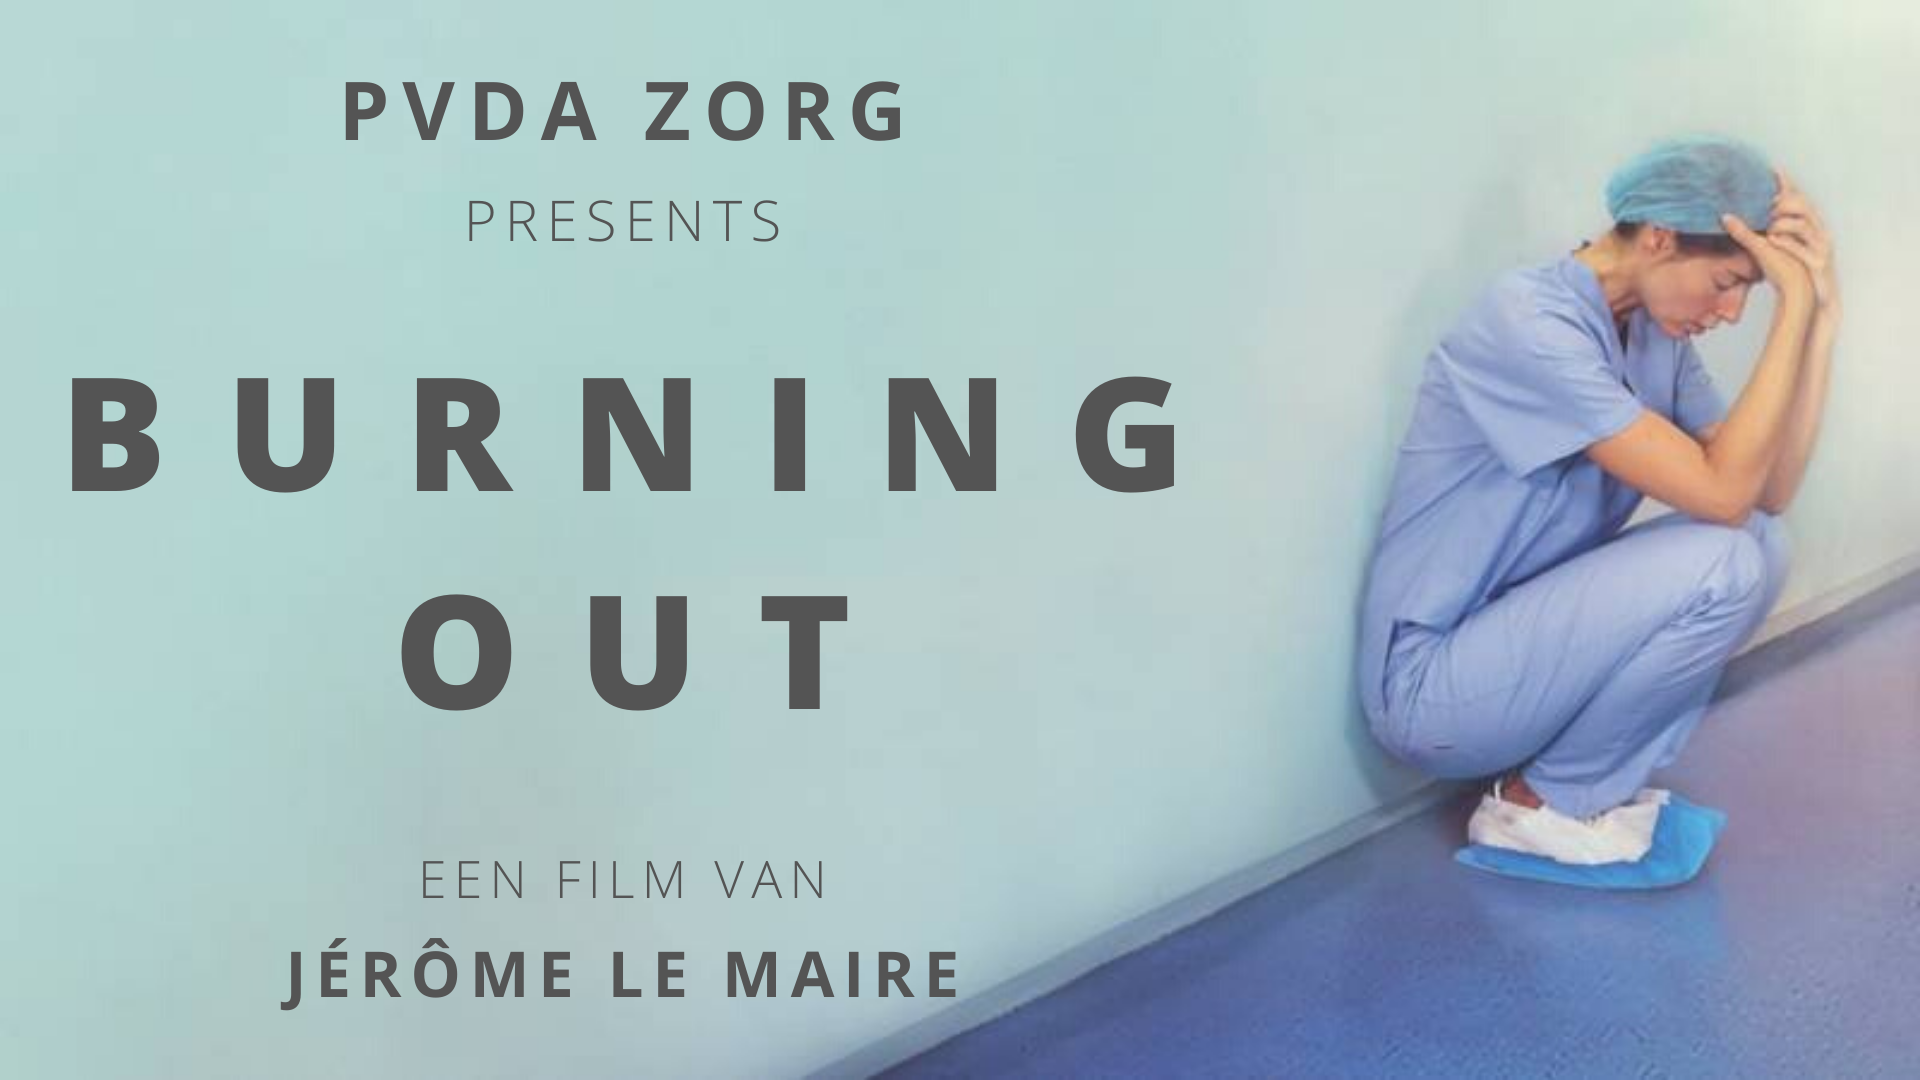 PVDA Zorg Presents: Burning Out